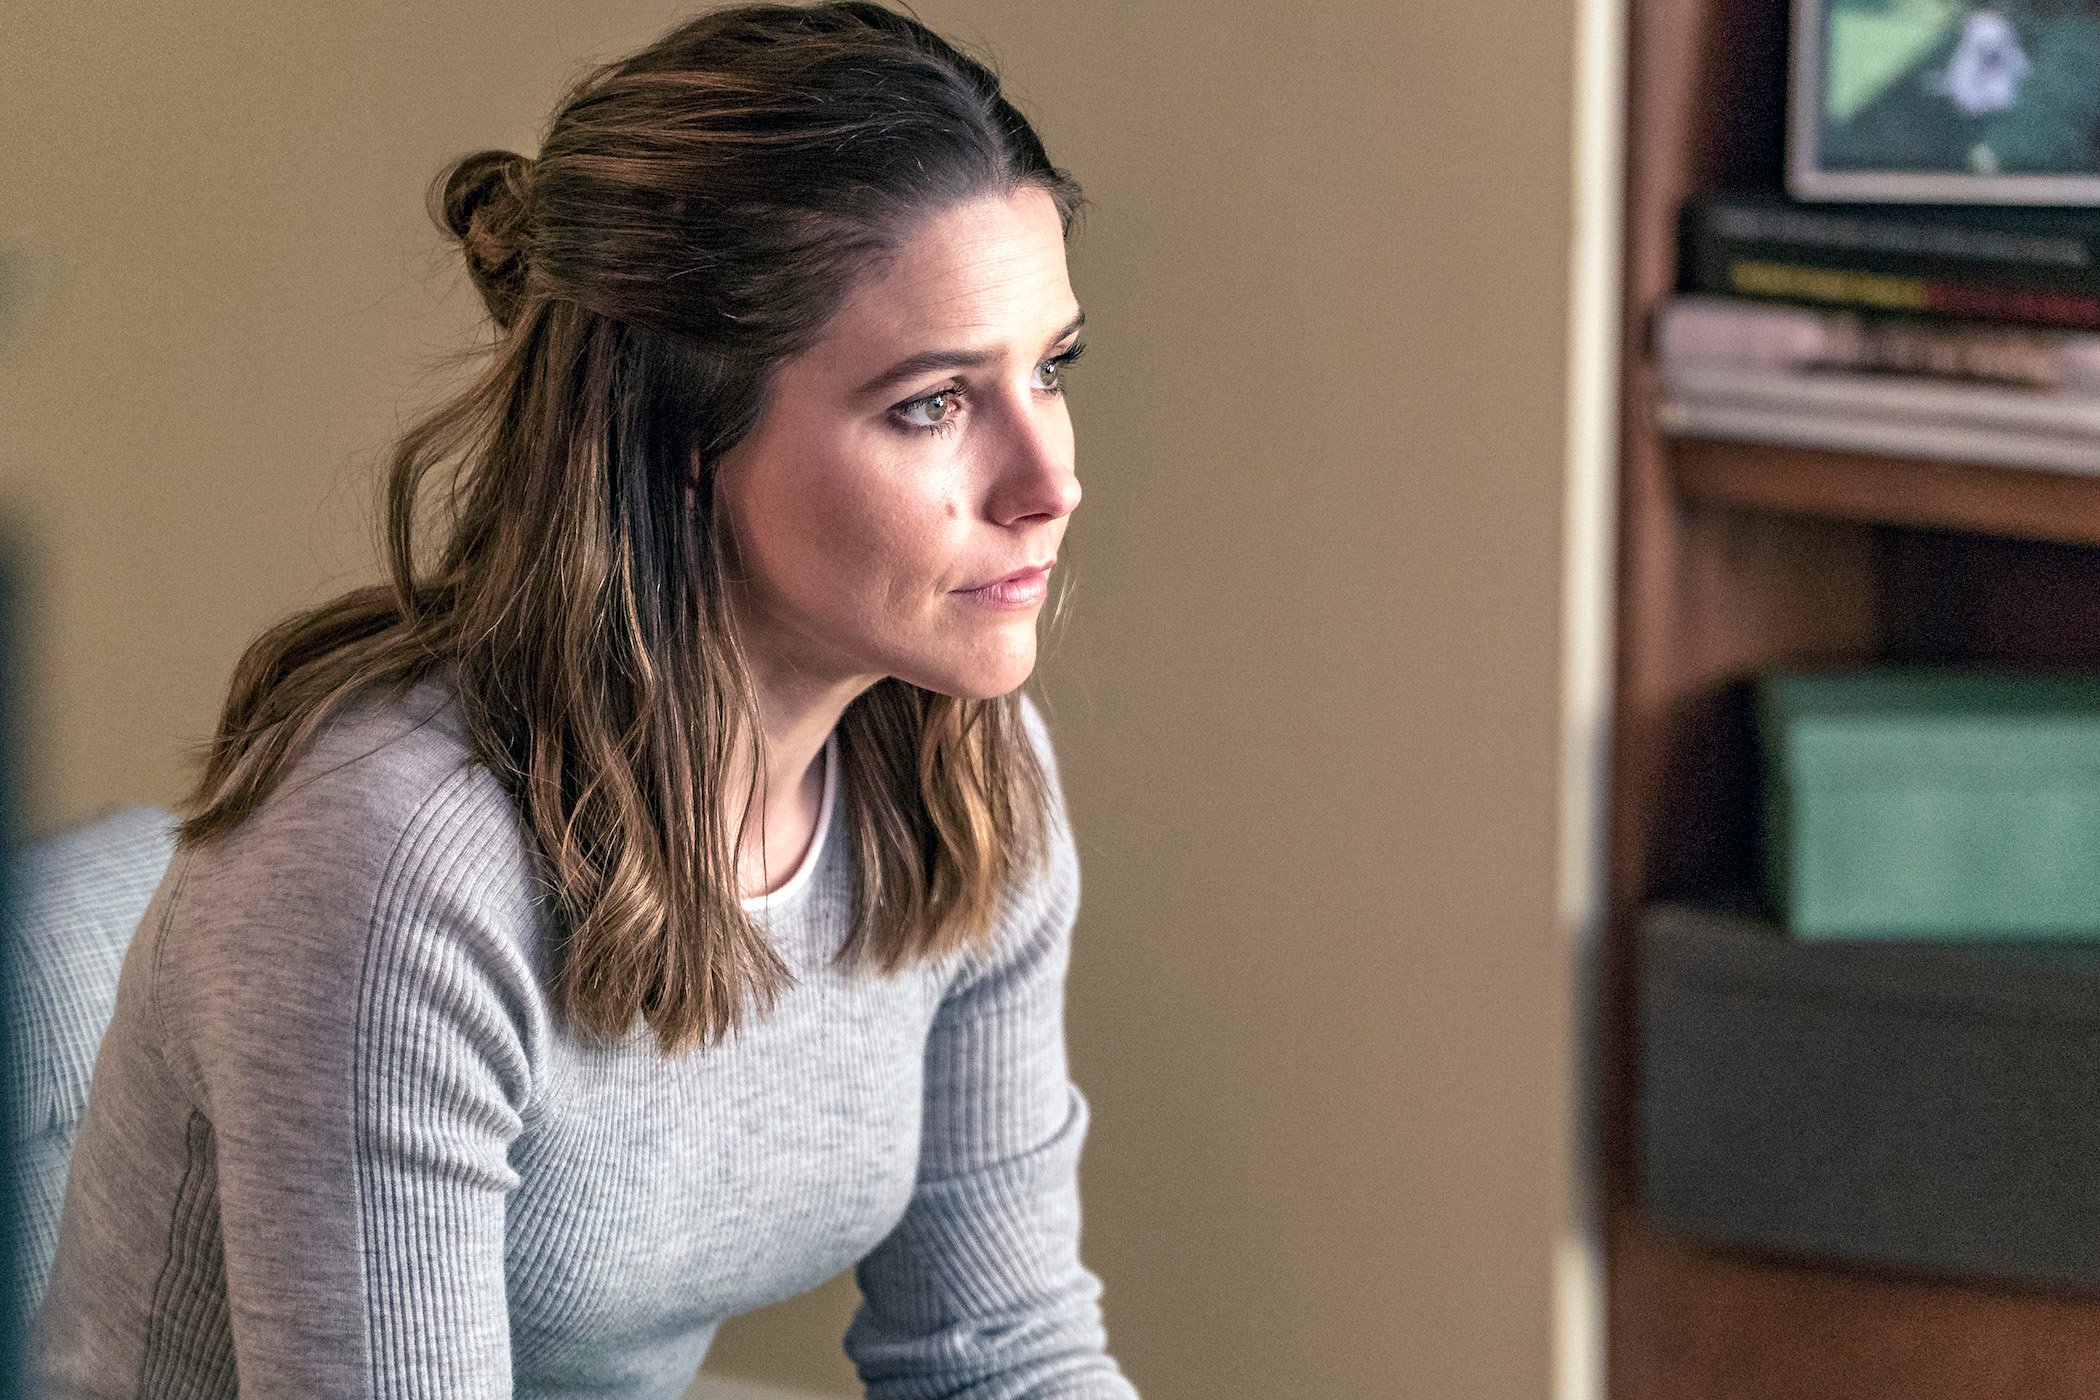 Sophia Bush as Erin Lindsay in 'Chicago P.D.' sitting and looking serious. Sophia Bush stars in 'Good Sam' premiering in 2022 at the same time as 'Chicago P.D.' Season 9.